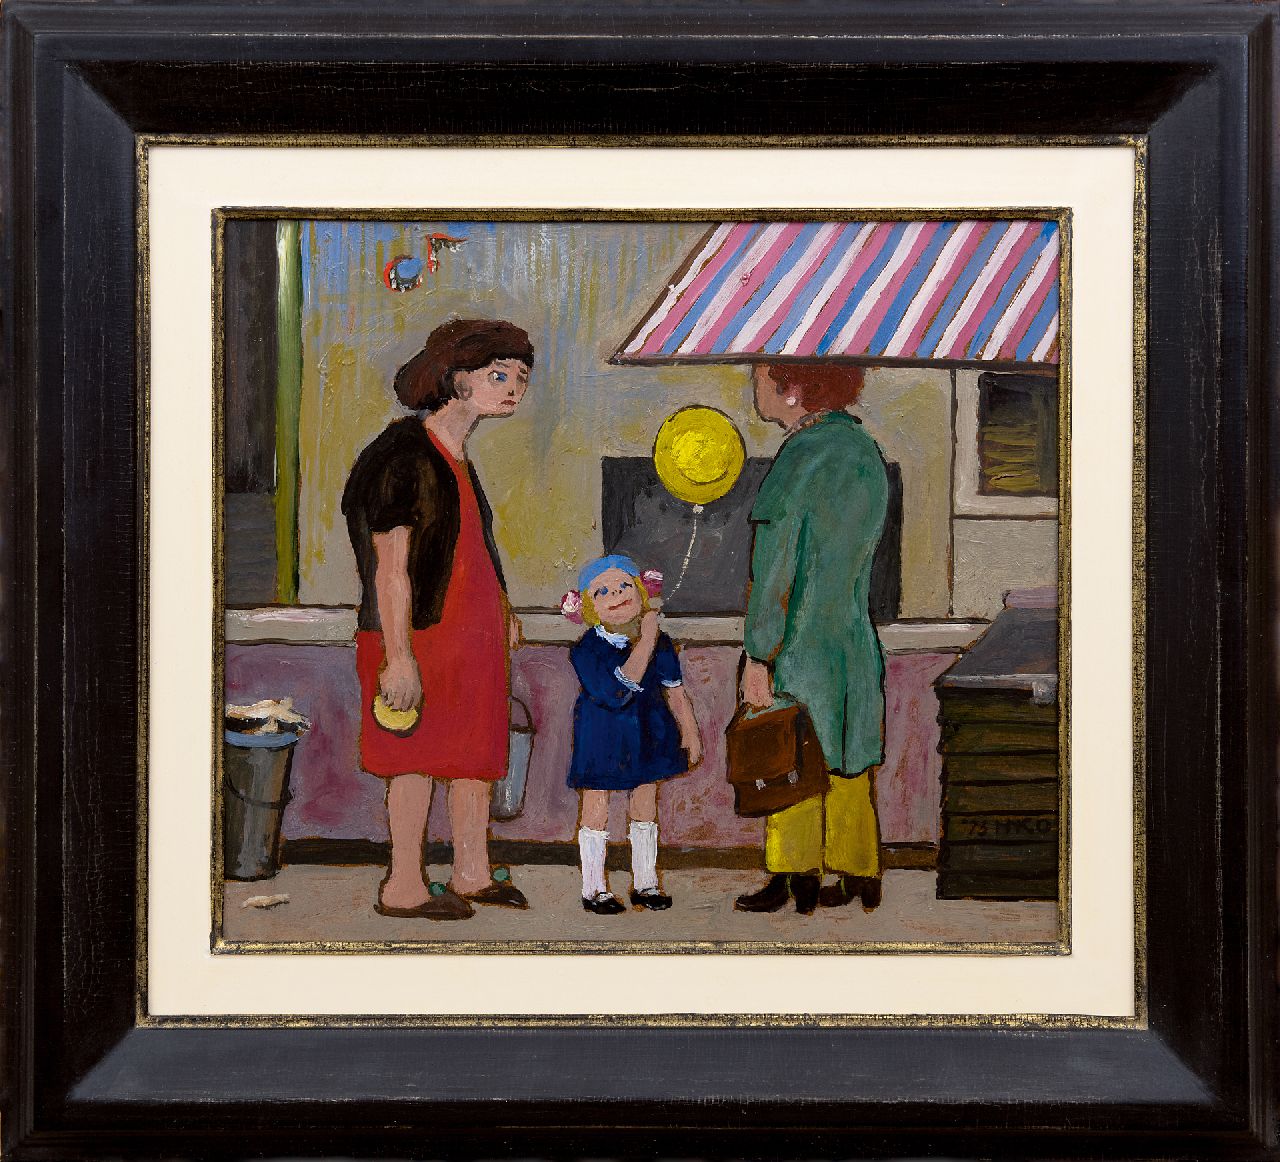 Kamerlingh Onnes H.H.  | 'Harm' Henrick Kamerlingh Onnes | Paintings offered for sale | The yellow balloon, oil on board 26.7 x 31.6 cm, signed l.r. with monogram and dated '73